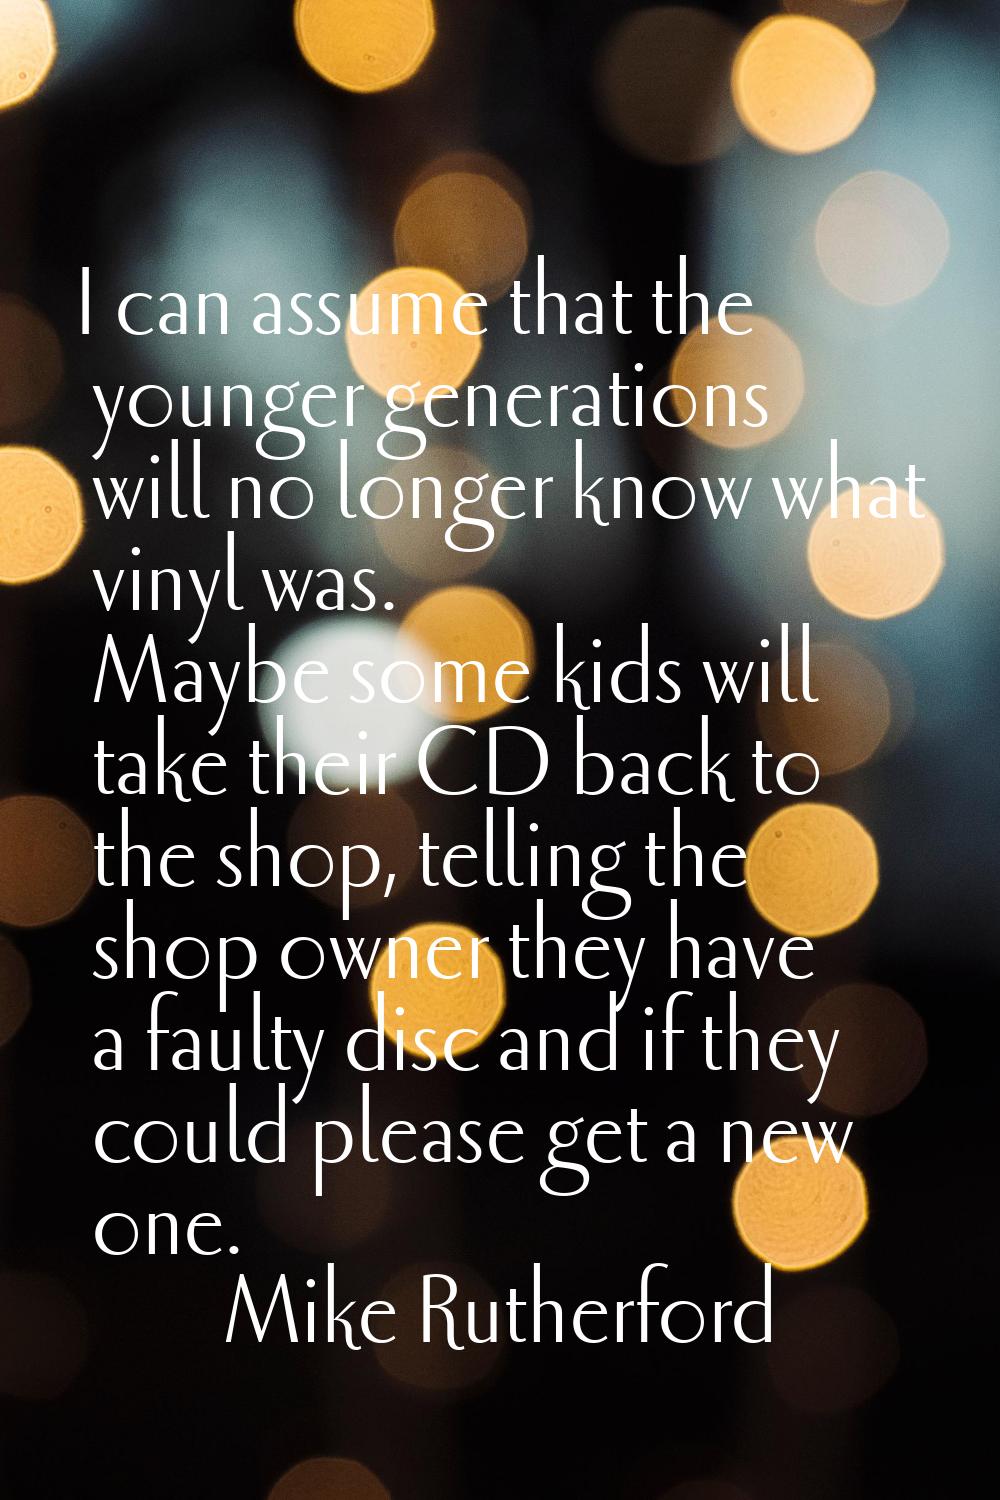 I can assume that the younger generations will no longer know what vinyl was. Maybe some kids will 